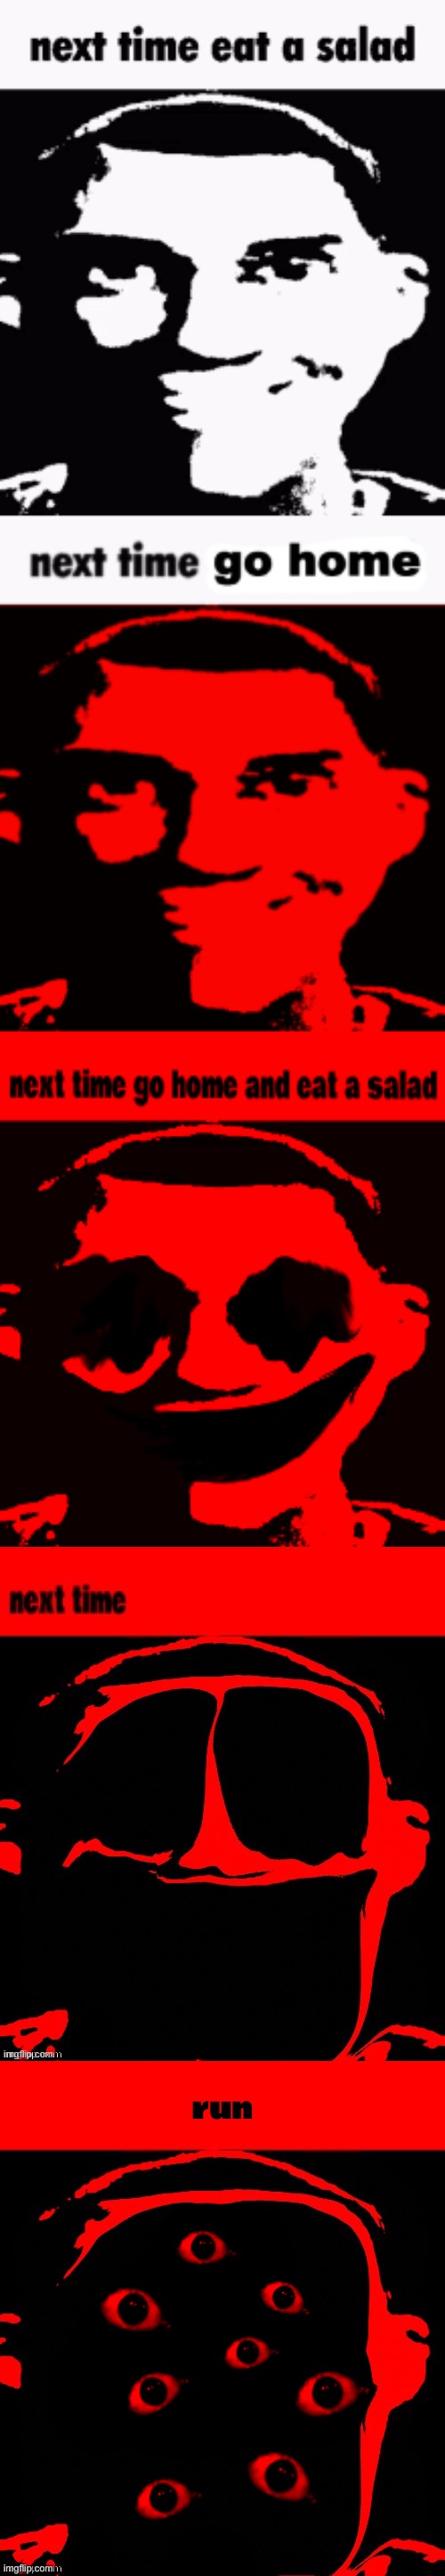 image tagged in next time eat a salad,next time go home,next time go home and eat a salad,next time,run | made w/ Imgflip meme maker